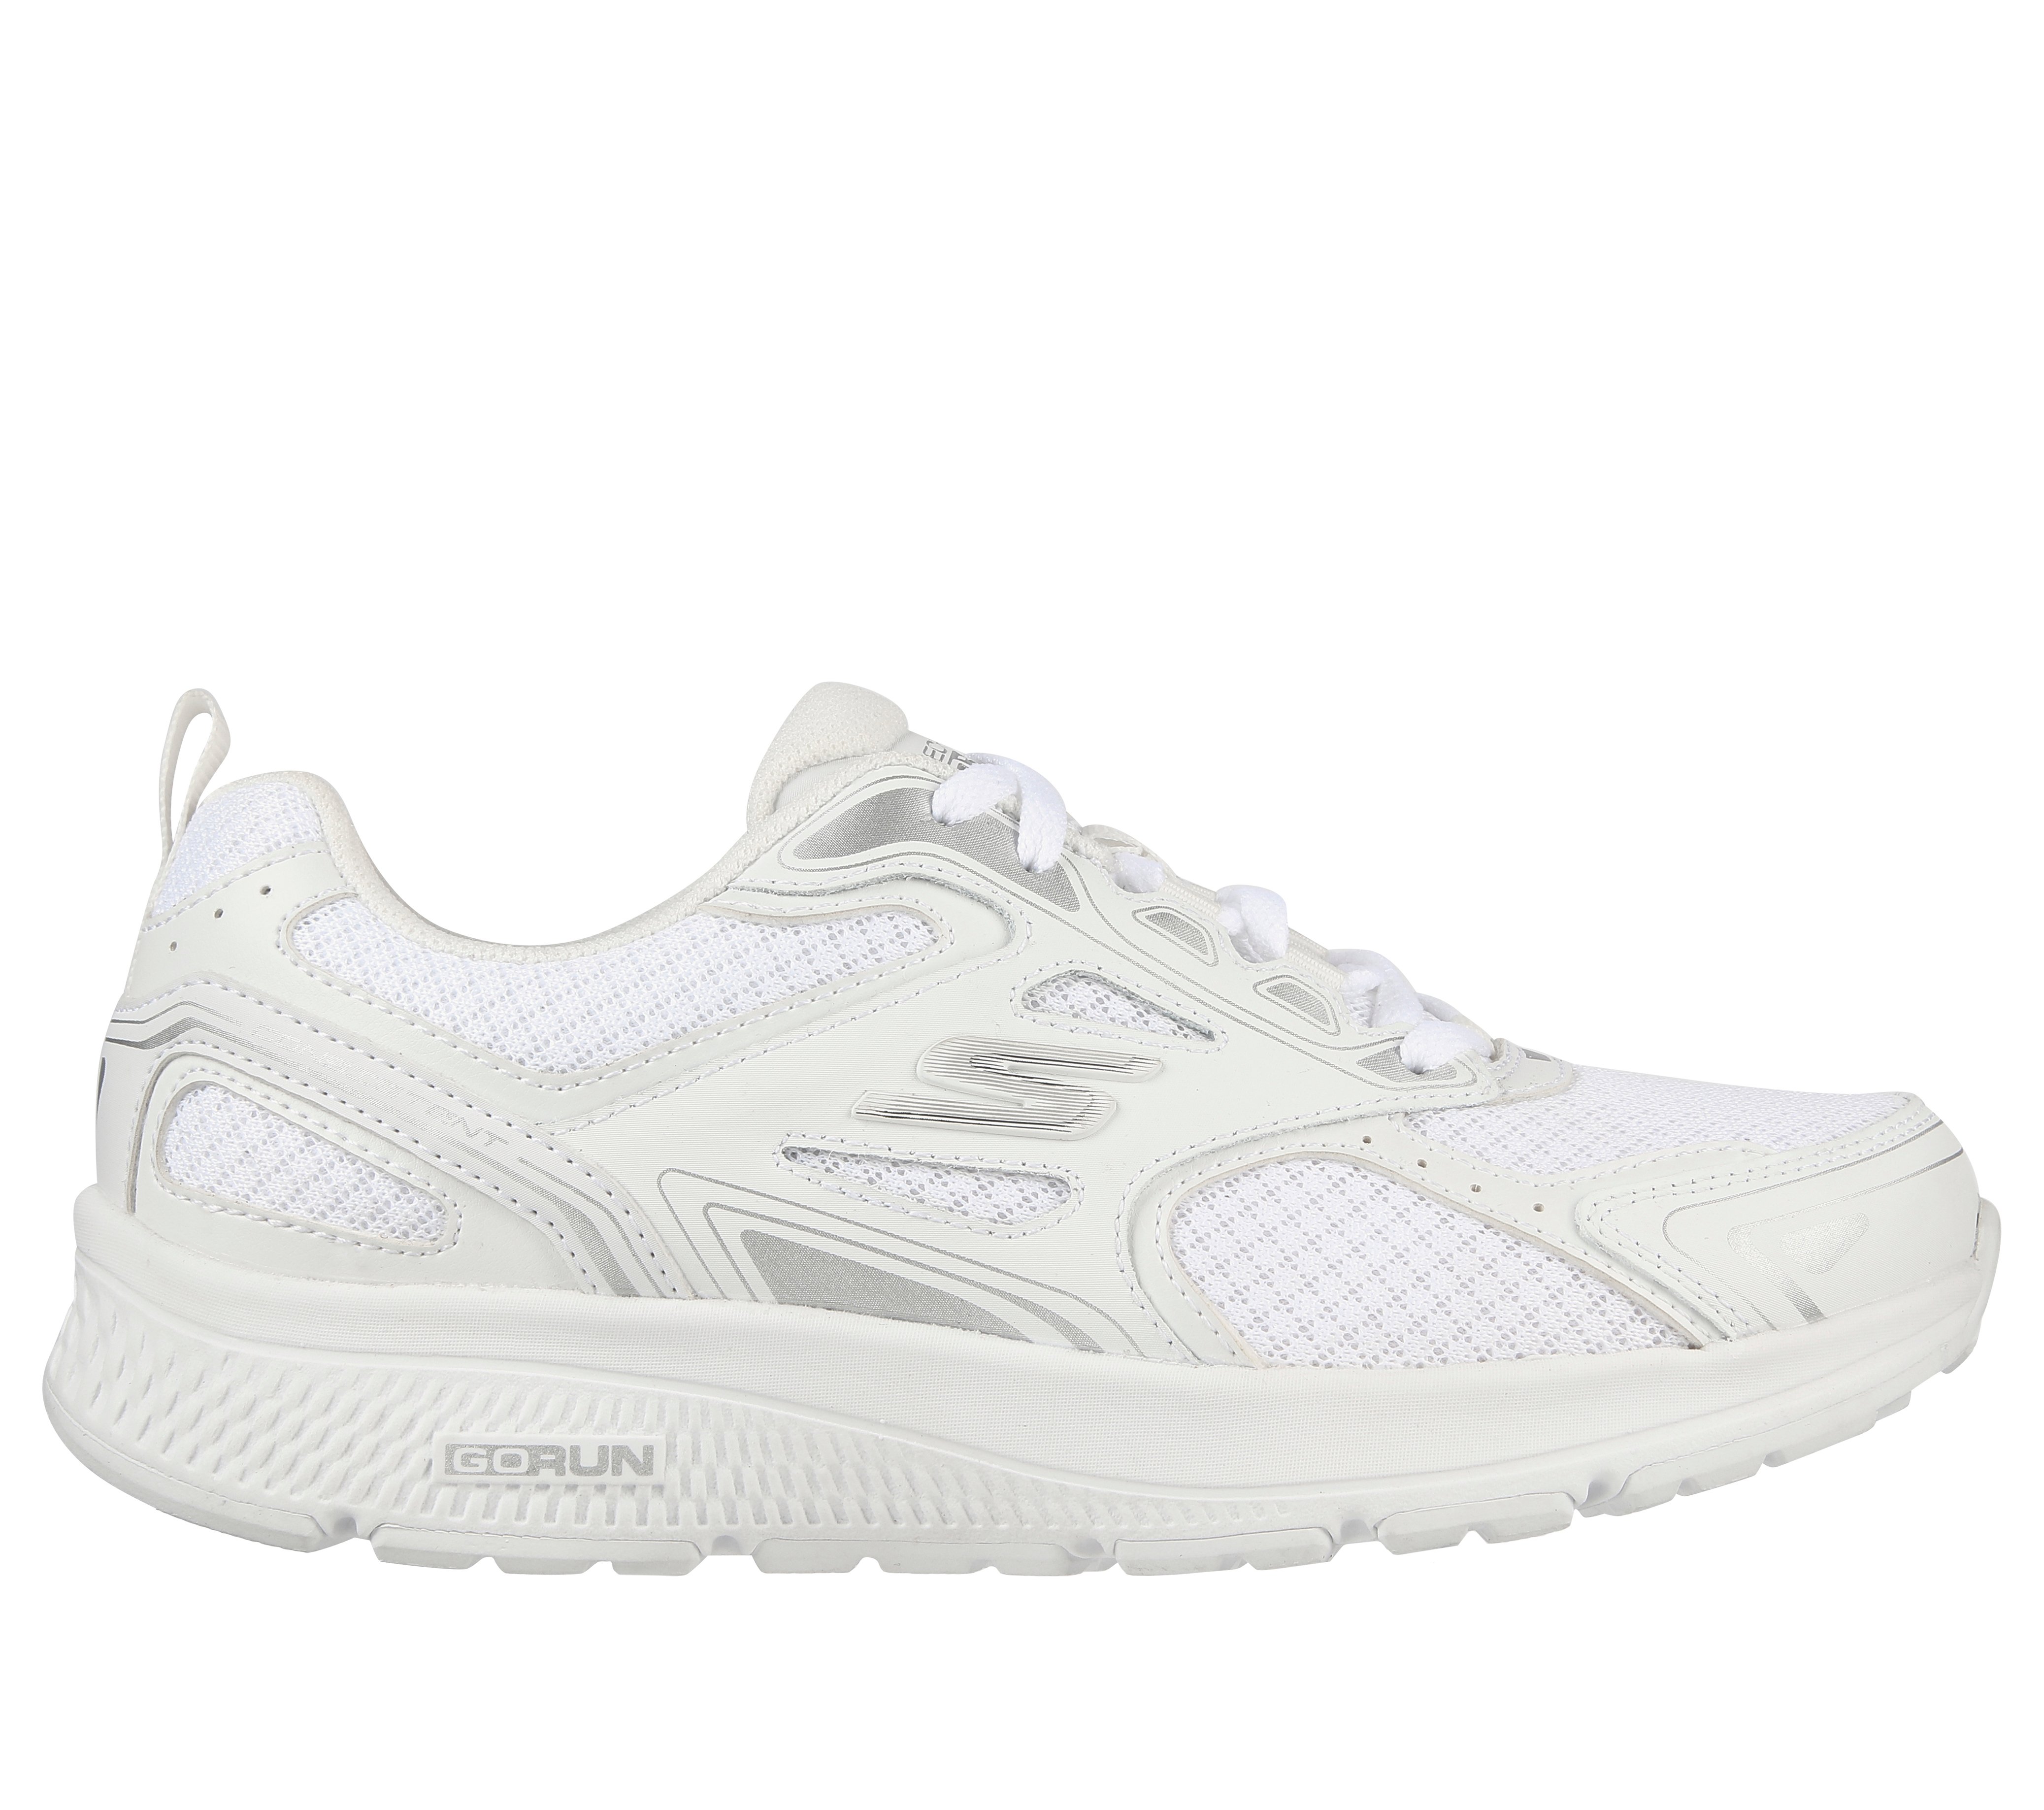 skechers high arch running shoes